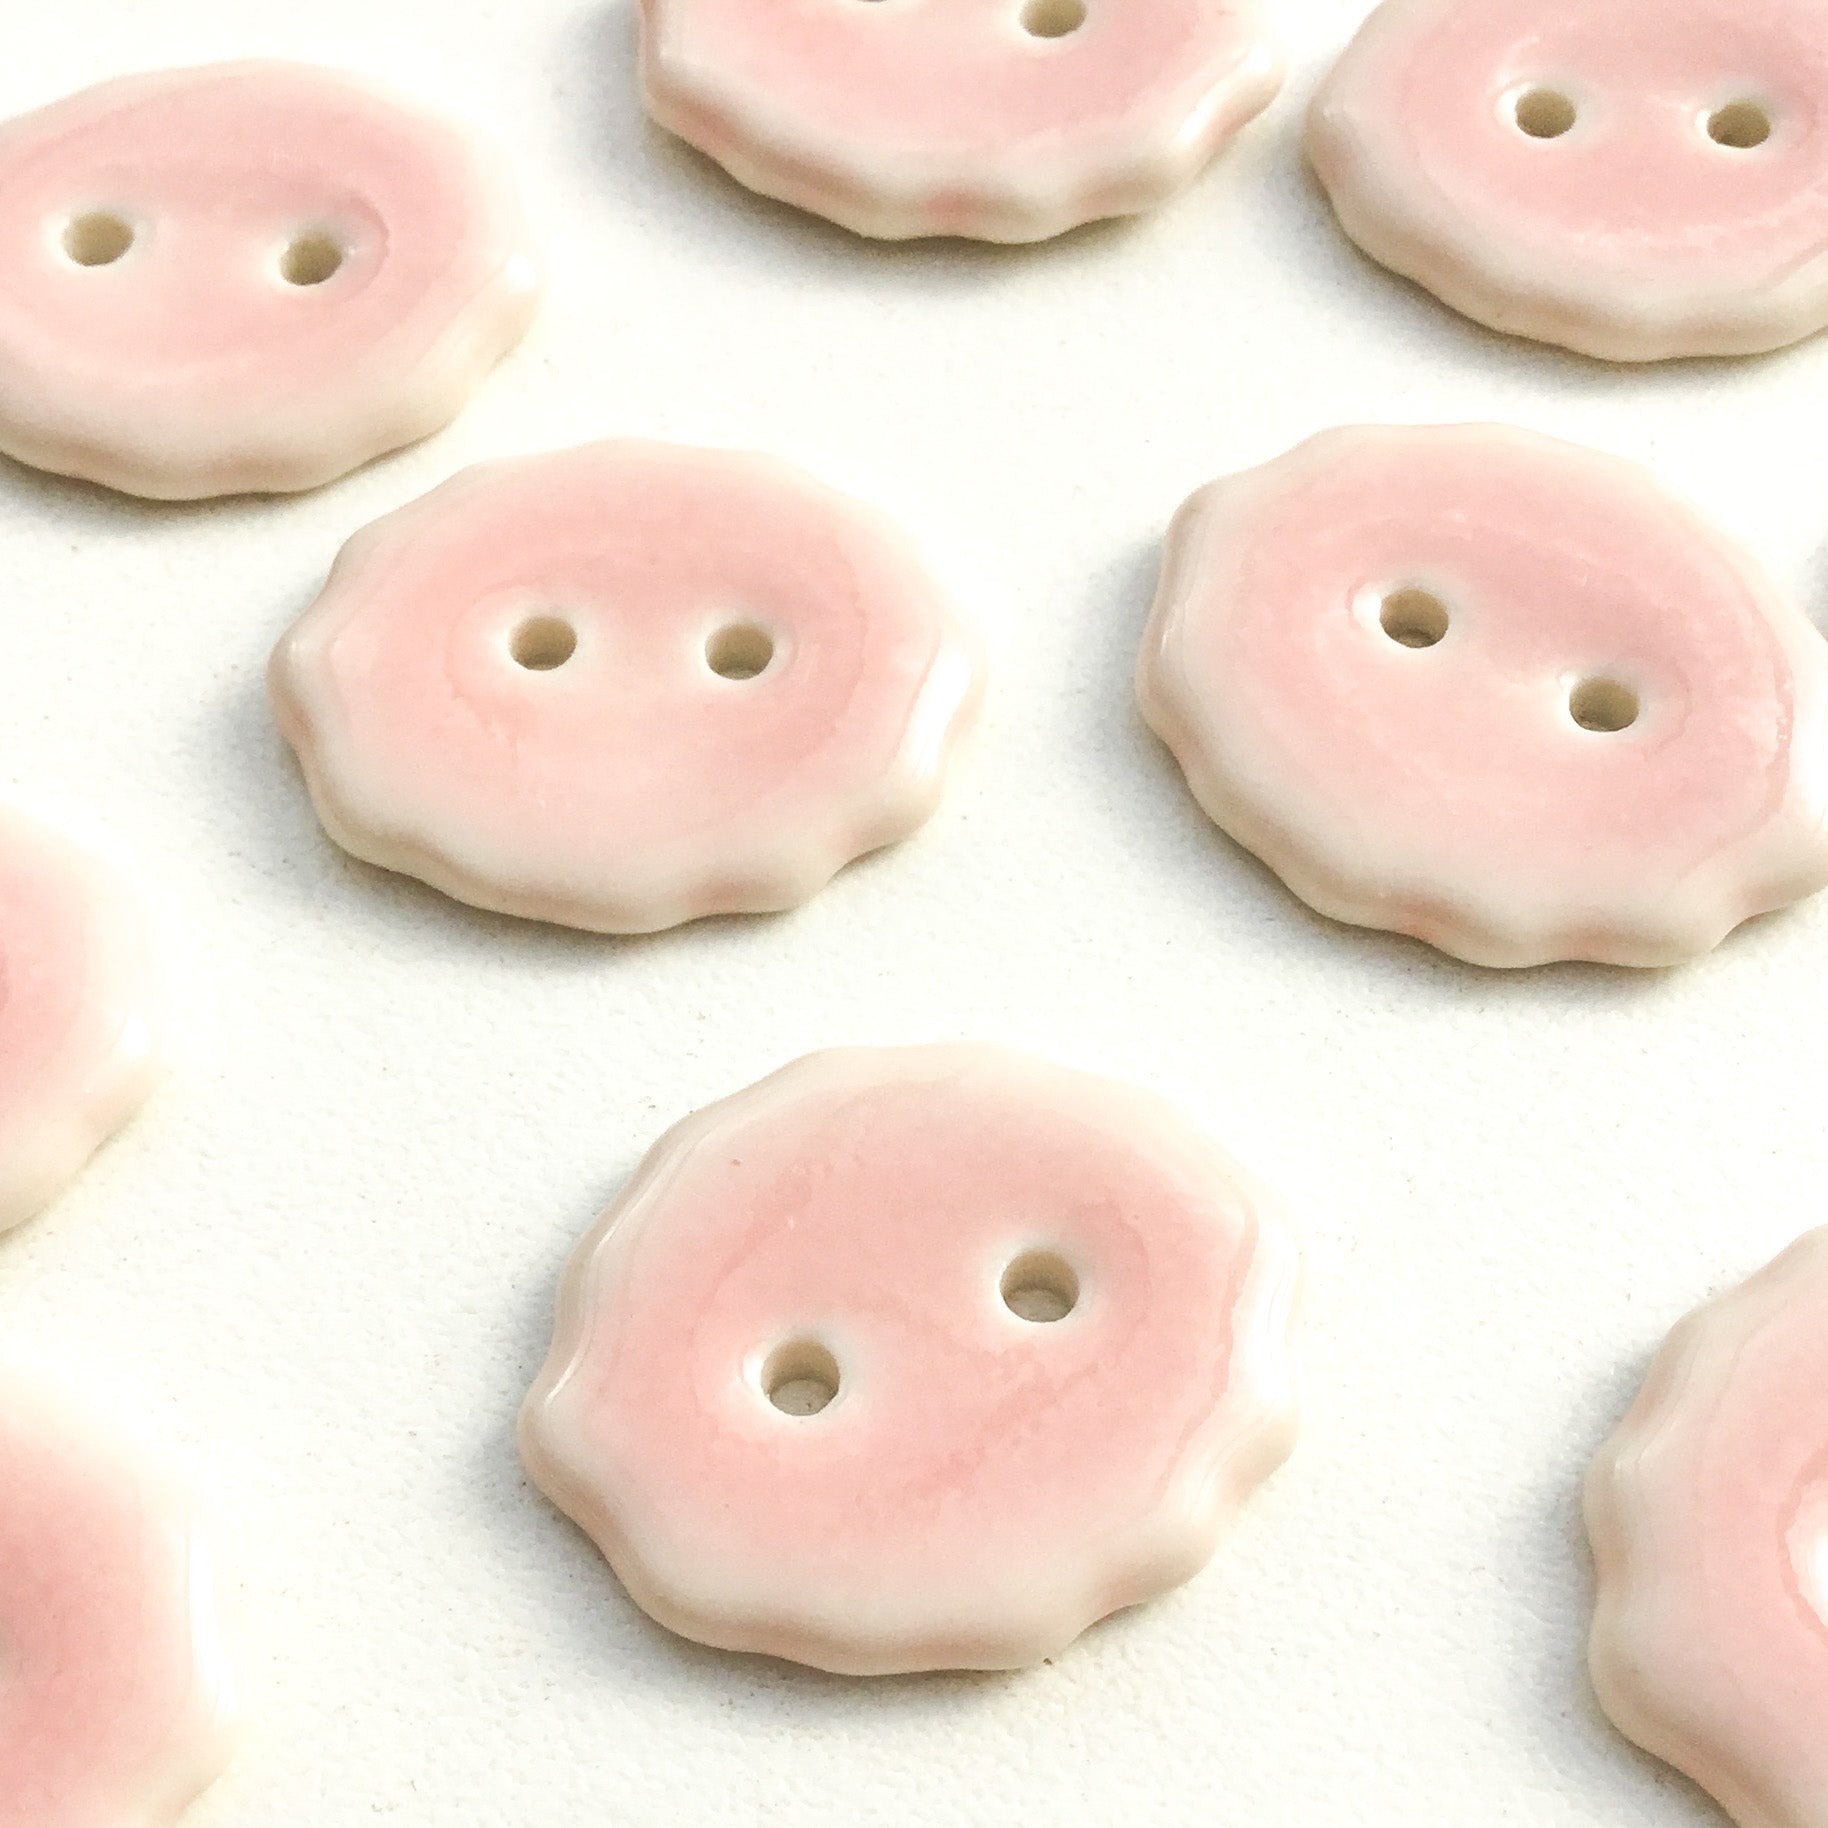 Dusty Pink Ceramic Buttons - Small Oval Buttons - 7/16 x 9/16